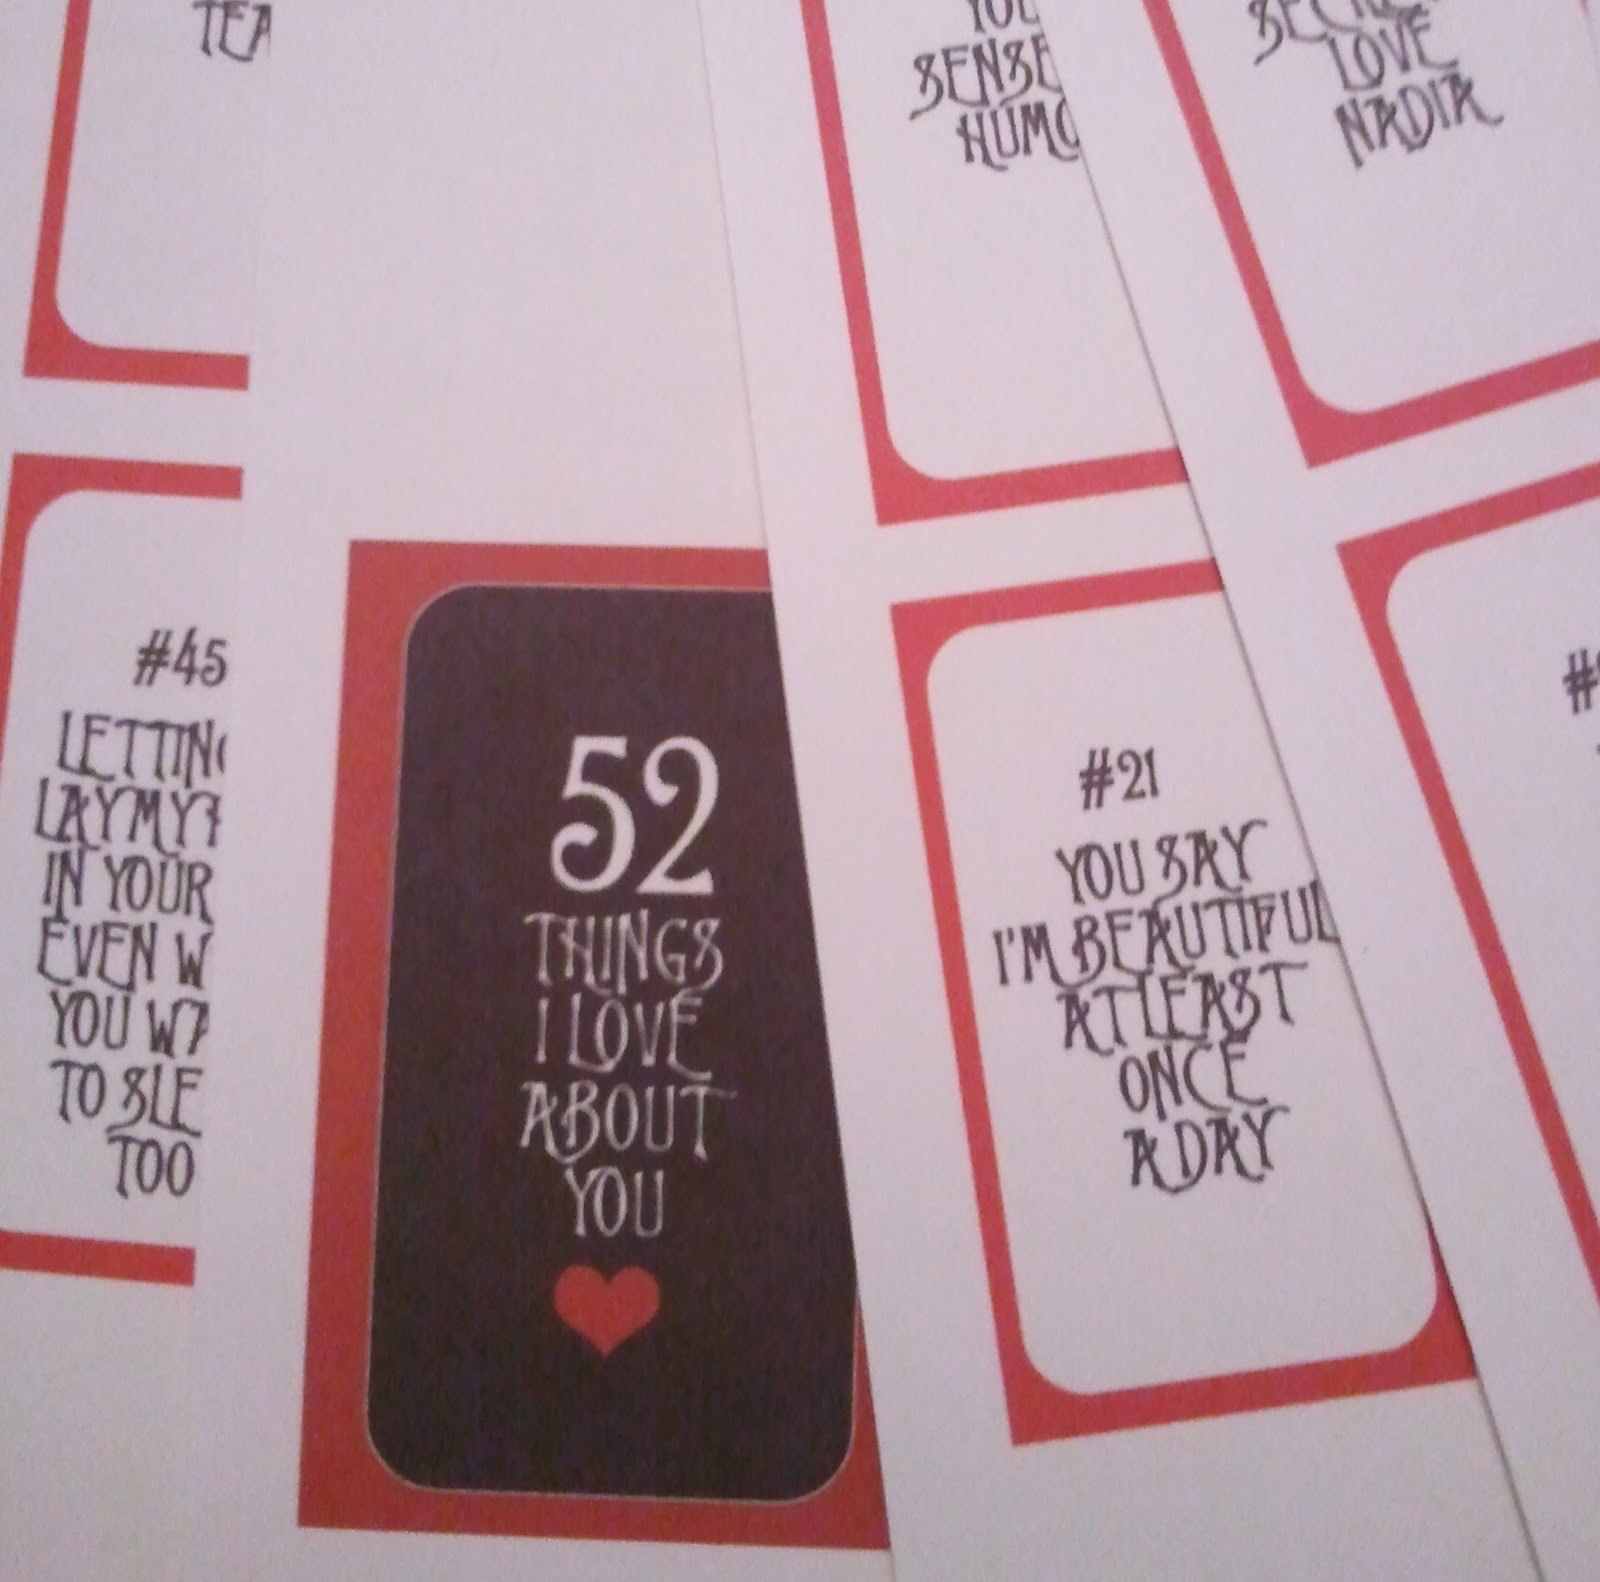 Images Of  Things Template  Vanscapital intended for 52 Things I Love About You Cards Template